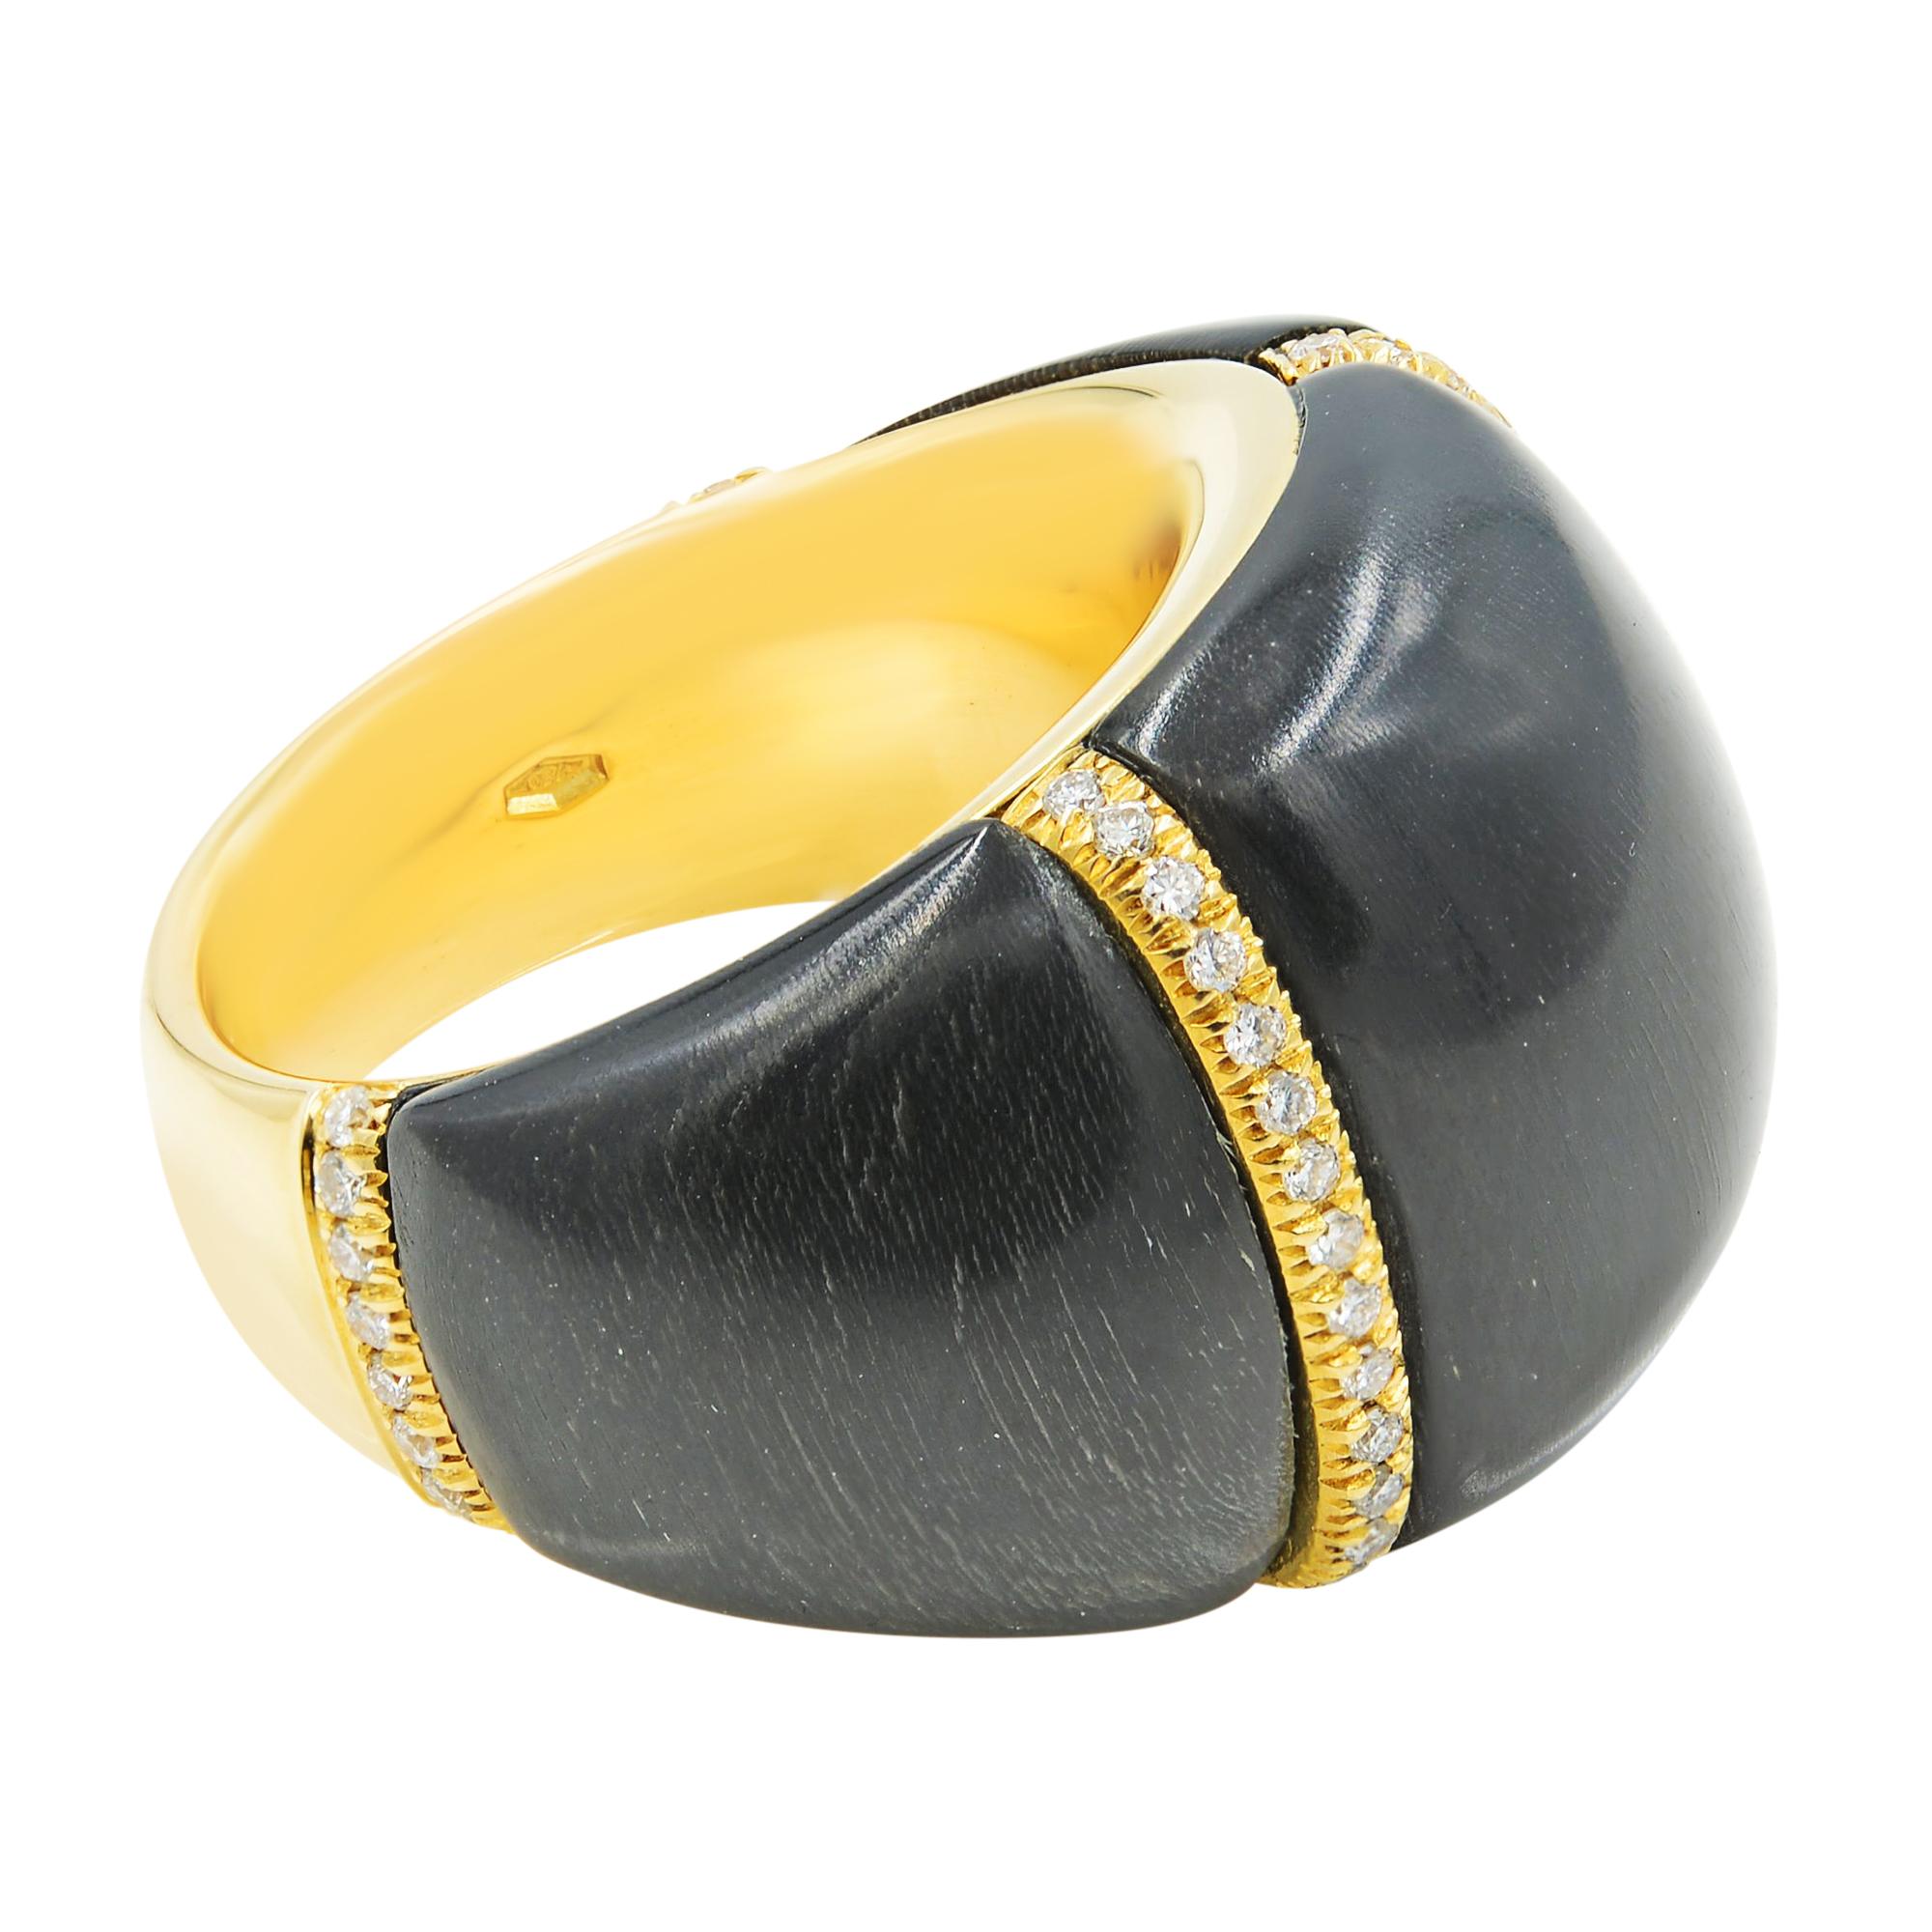 Modern Chantecler Black Onyx Diamond Dome Shaped Ring 18k Yellow Gold 0.50cttw Size 6.5 For Sale